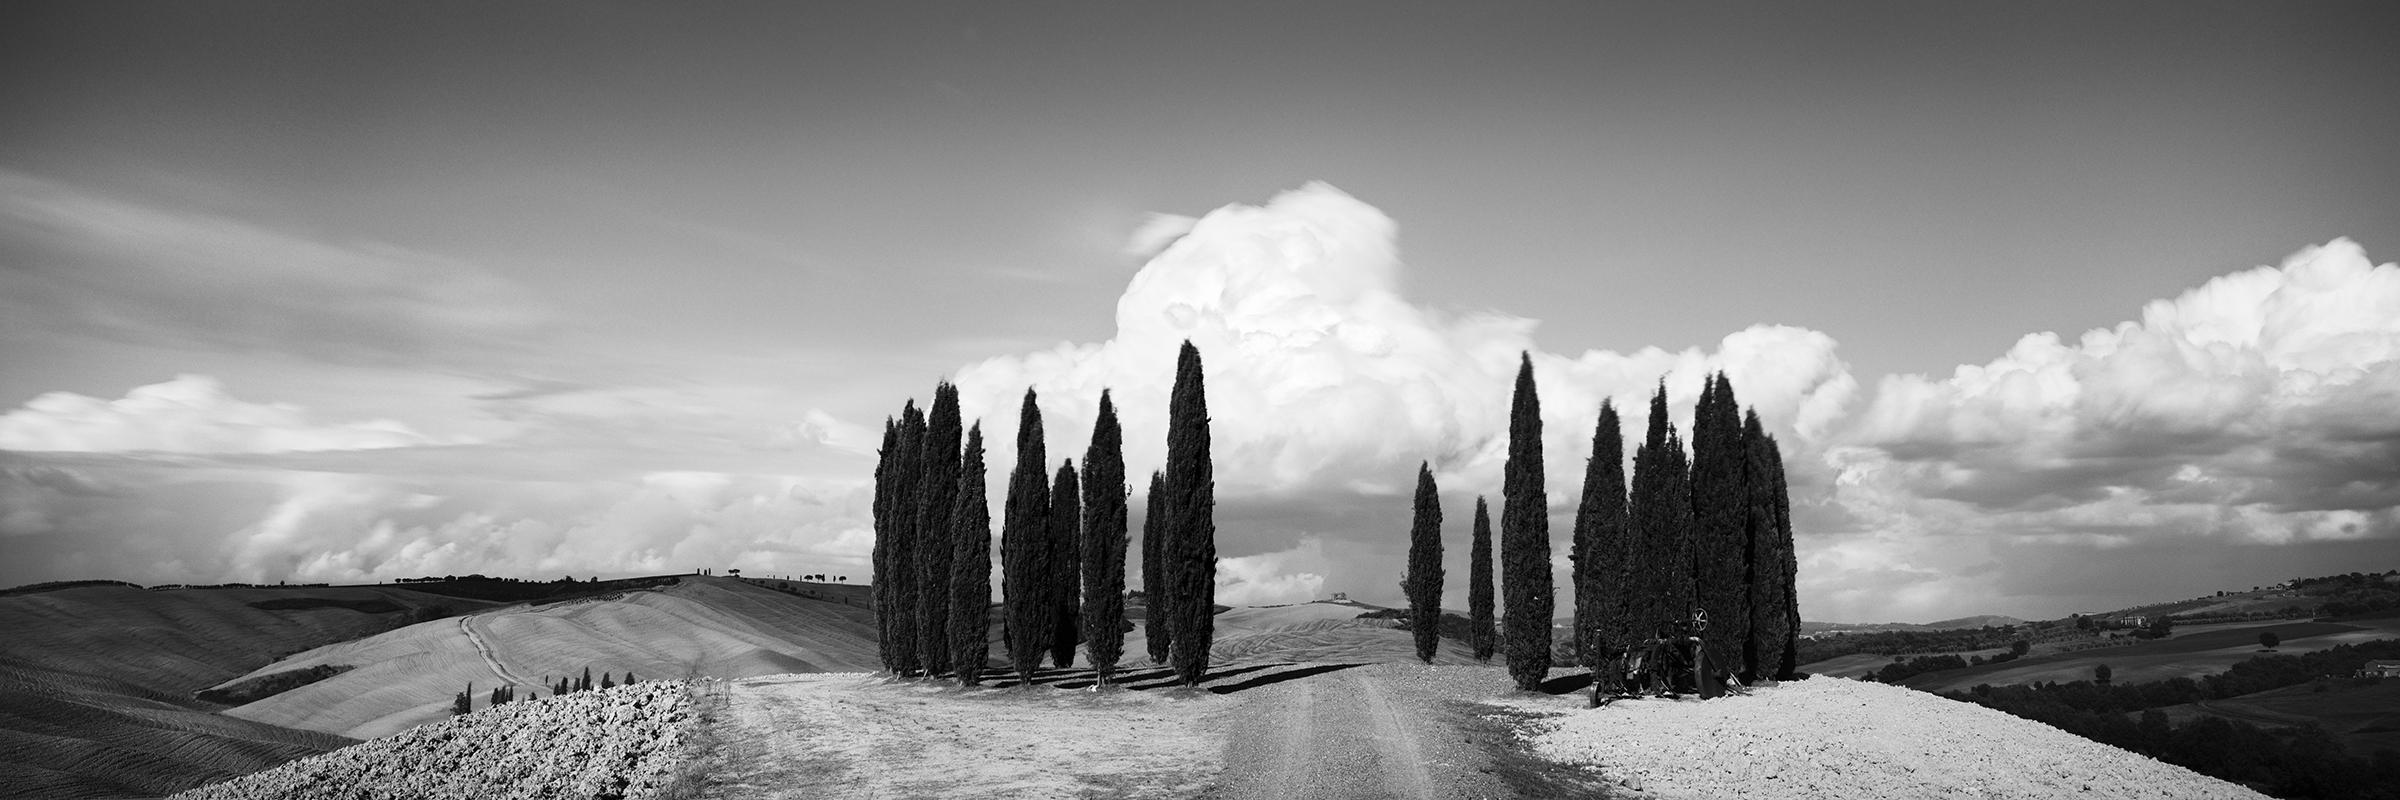 Gerald Berghammer Landscape Photograph - Circle of Cypress Trees, Tuscany, black and white art photography, landscape